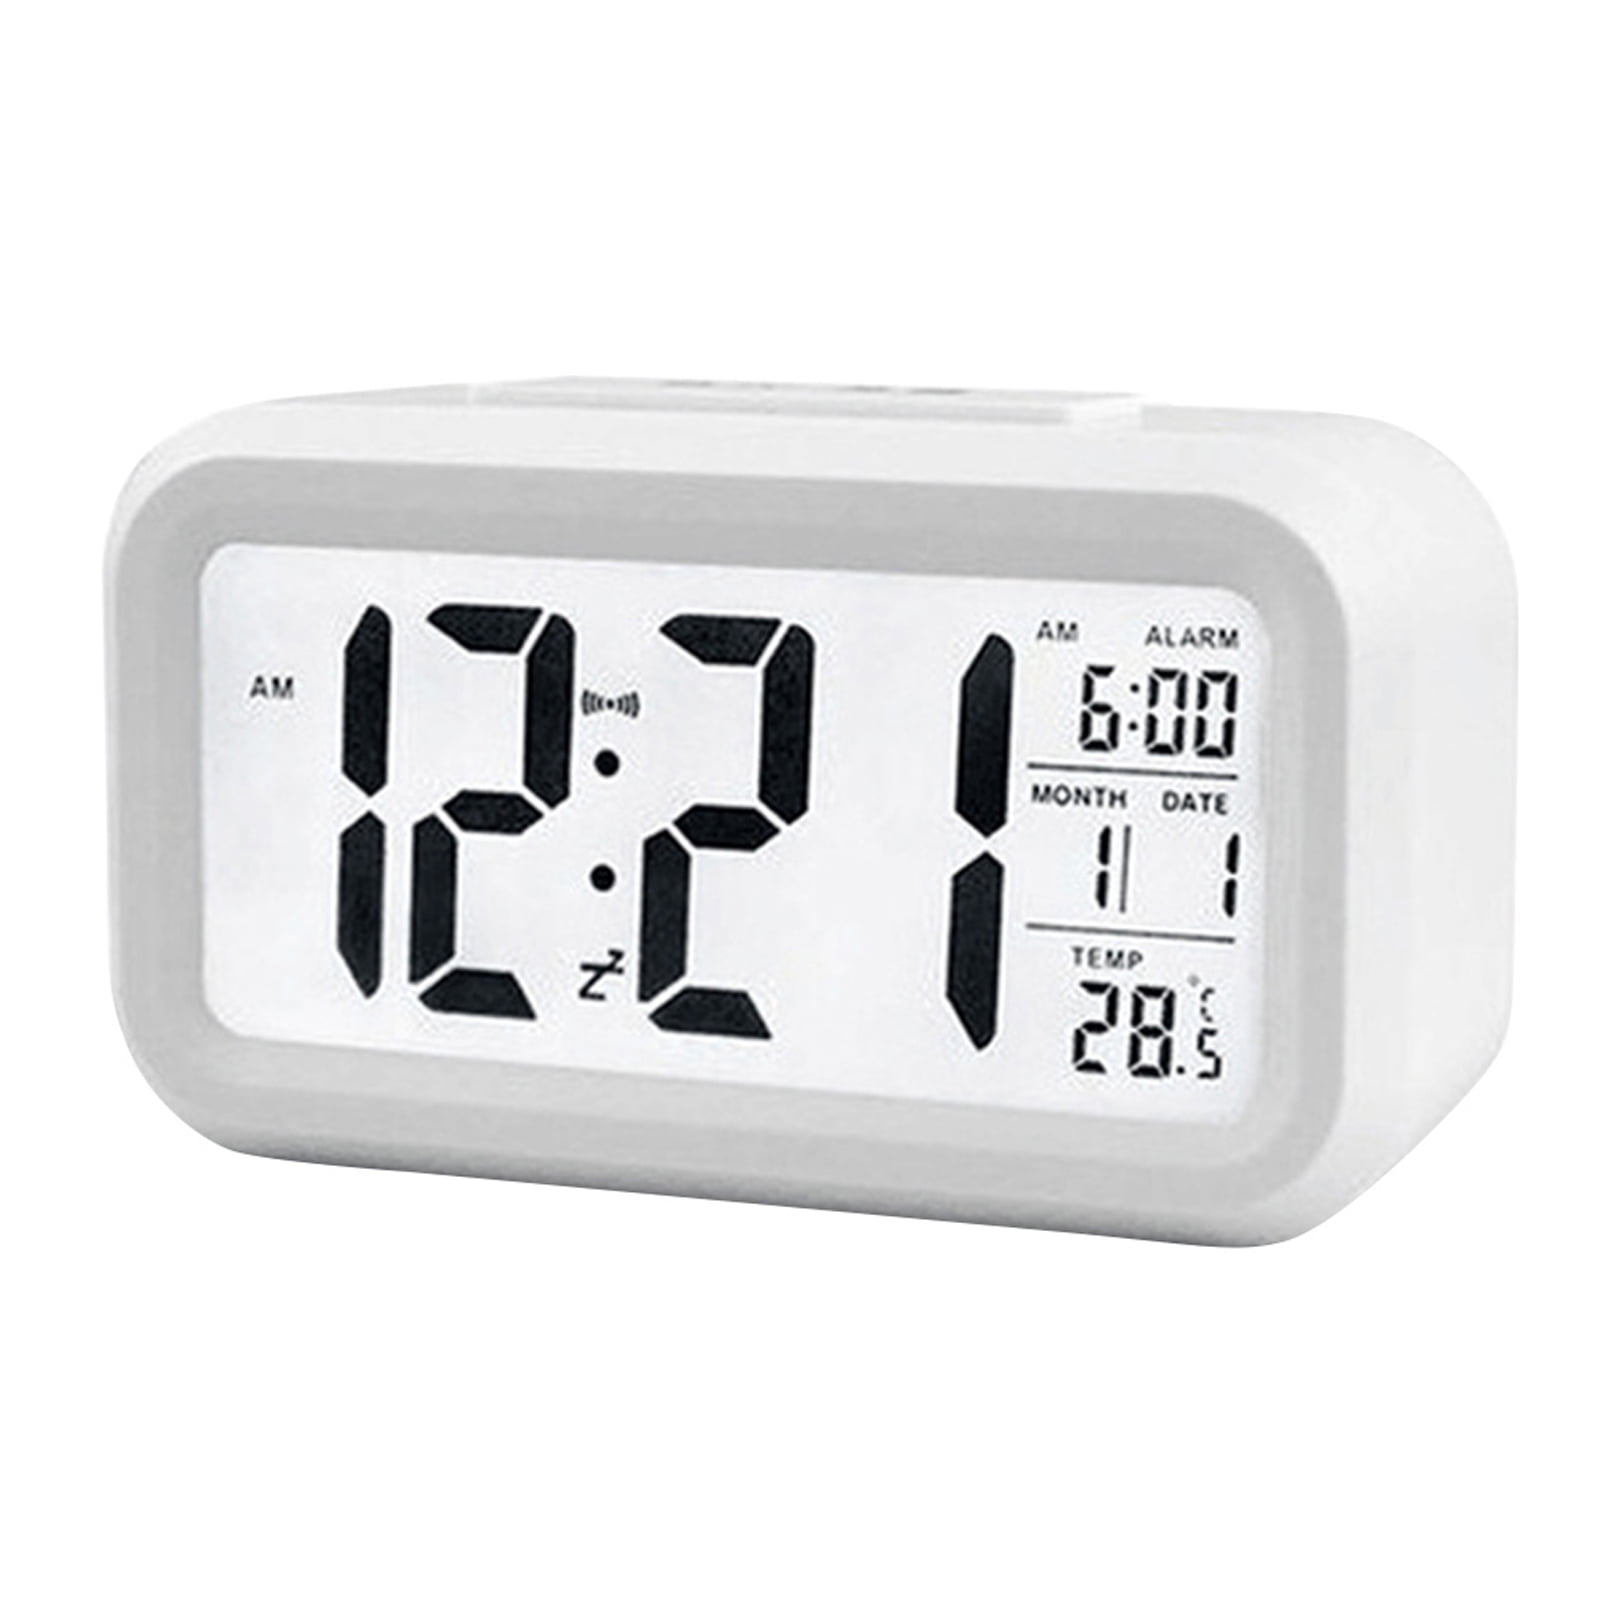 Digital alarm clock with temperature display 3.3 LCD display with blue LED backlight DCF radio-controlled alarm clock/travel alarm Bearware Indoor | Snooze function 